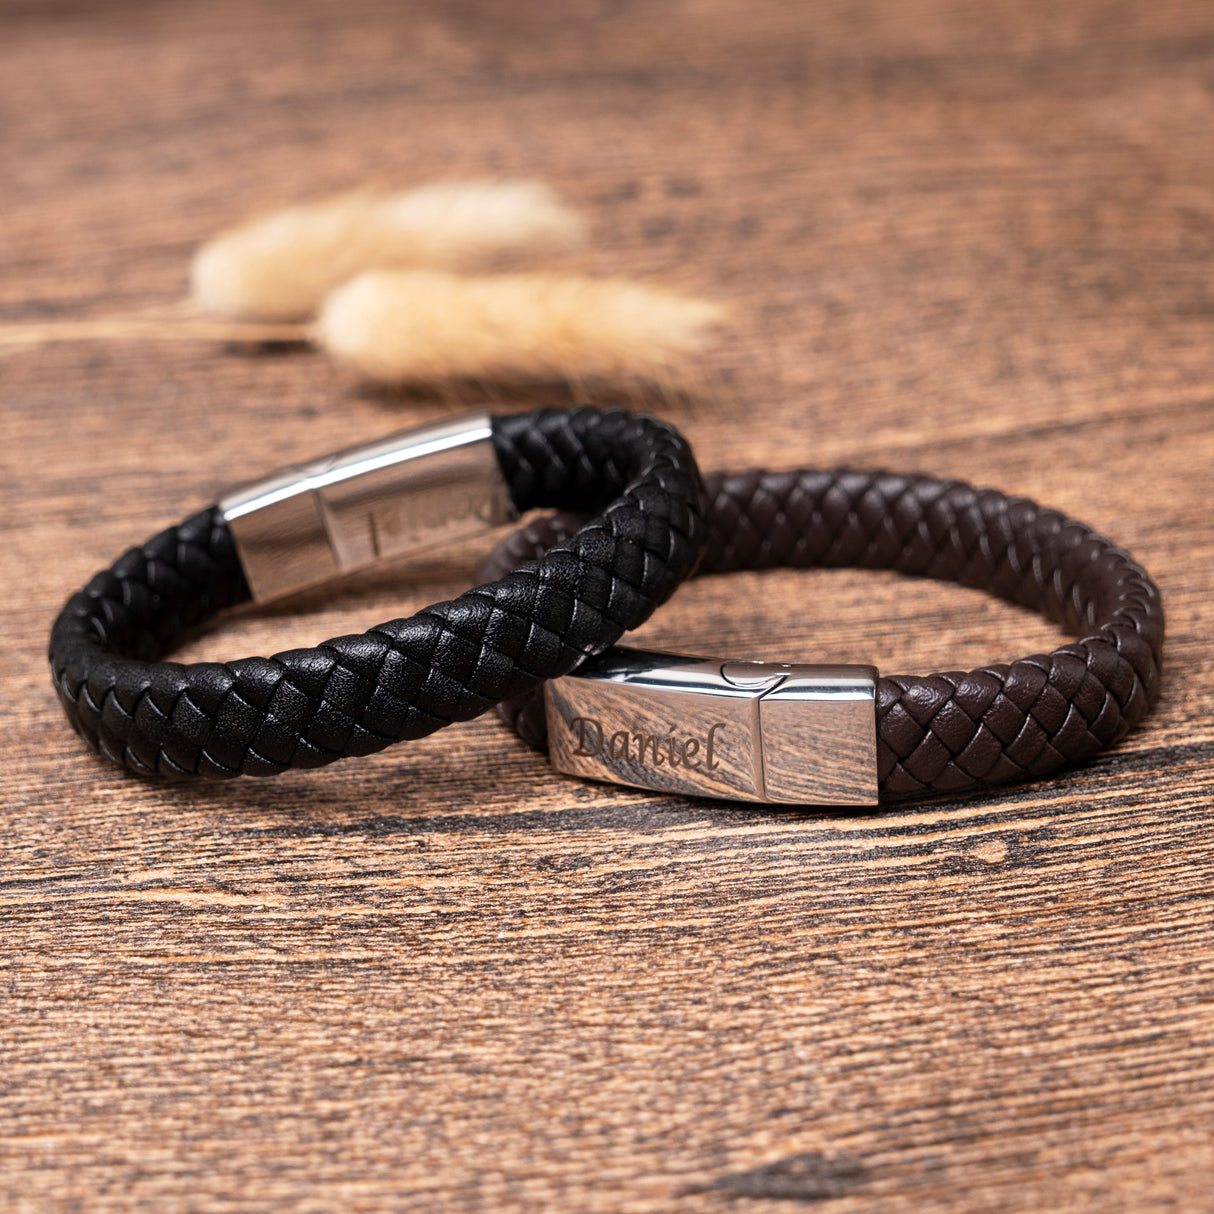 GEX Personalized Engraving Leather Bracelet Jewelry for Men - GexWorldwide